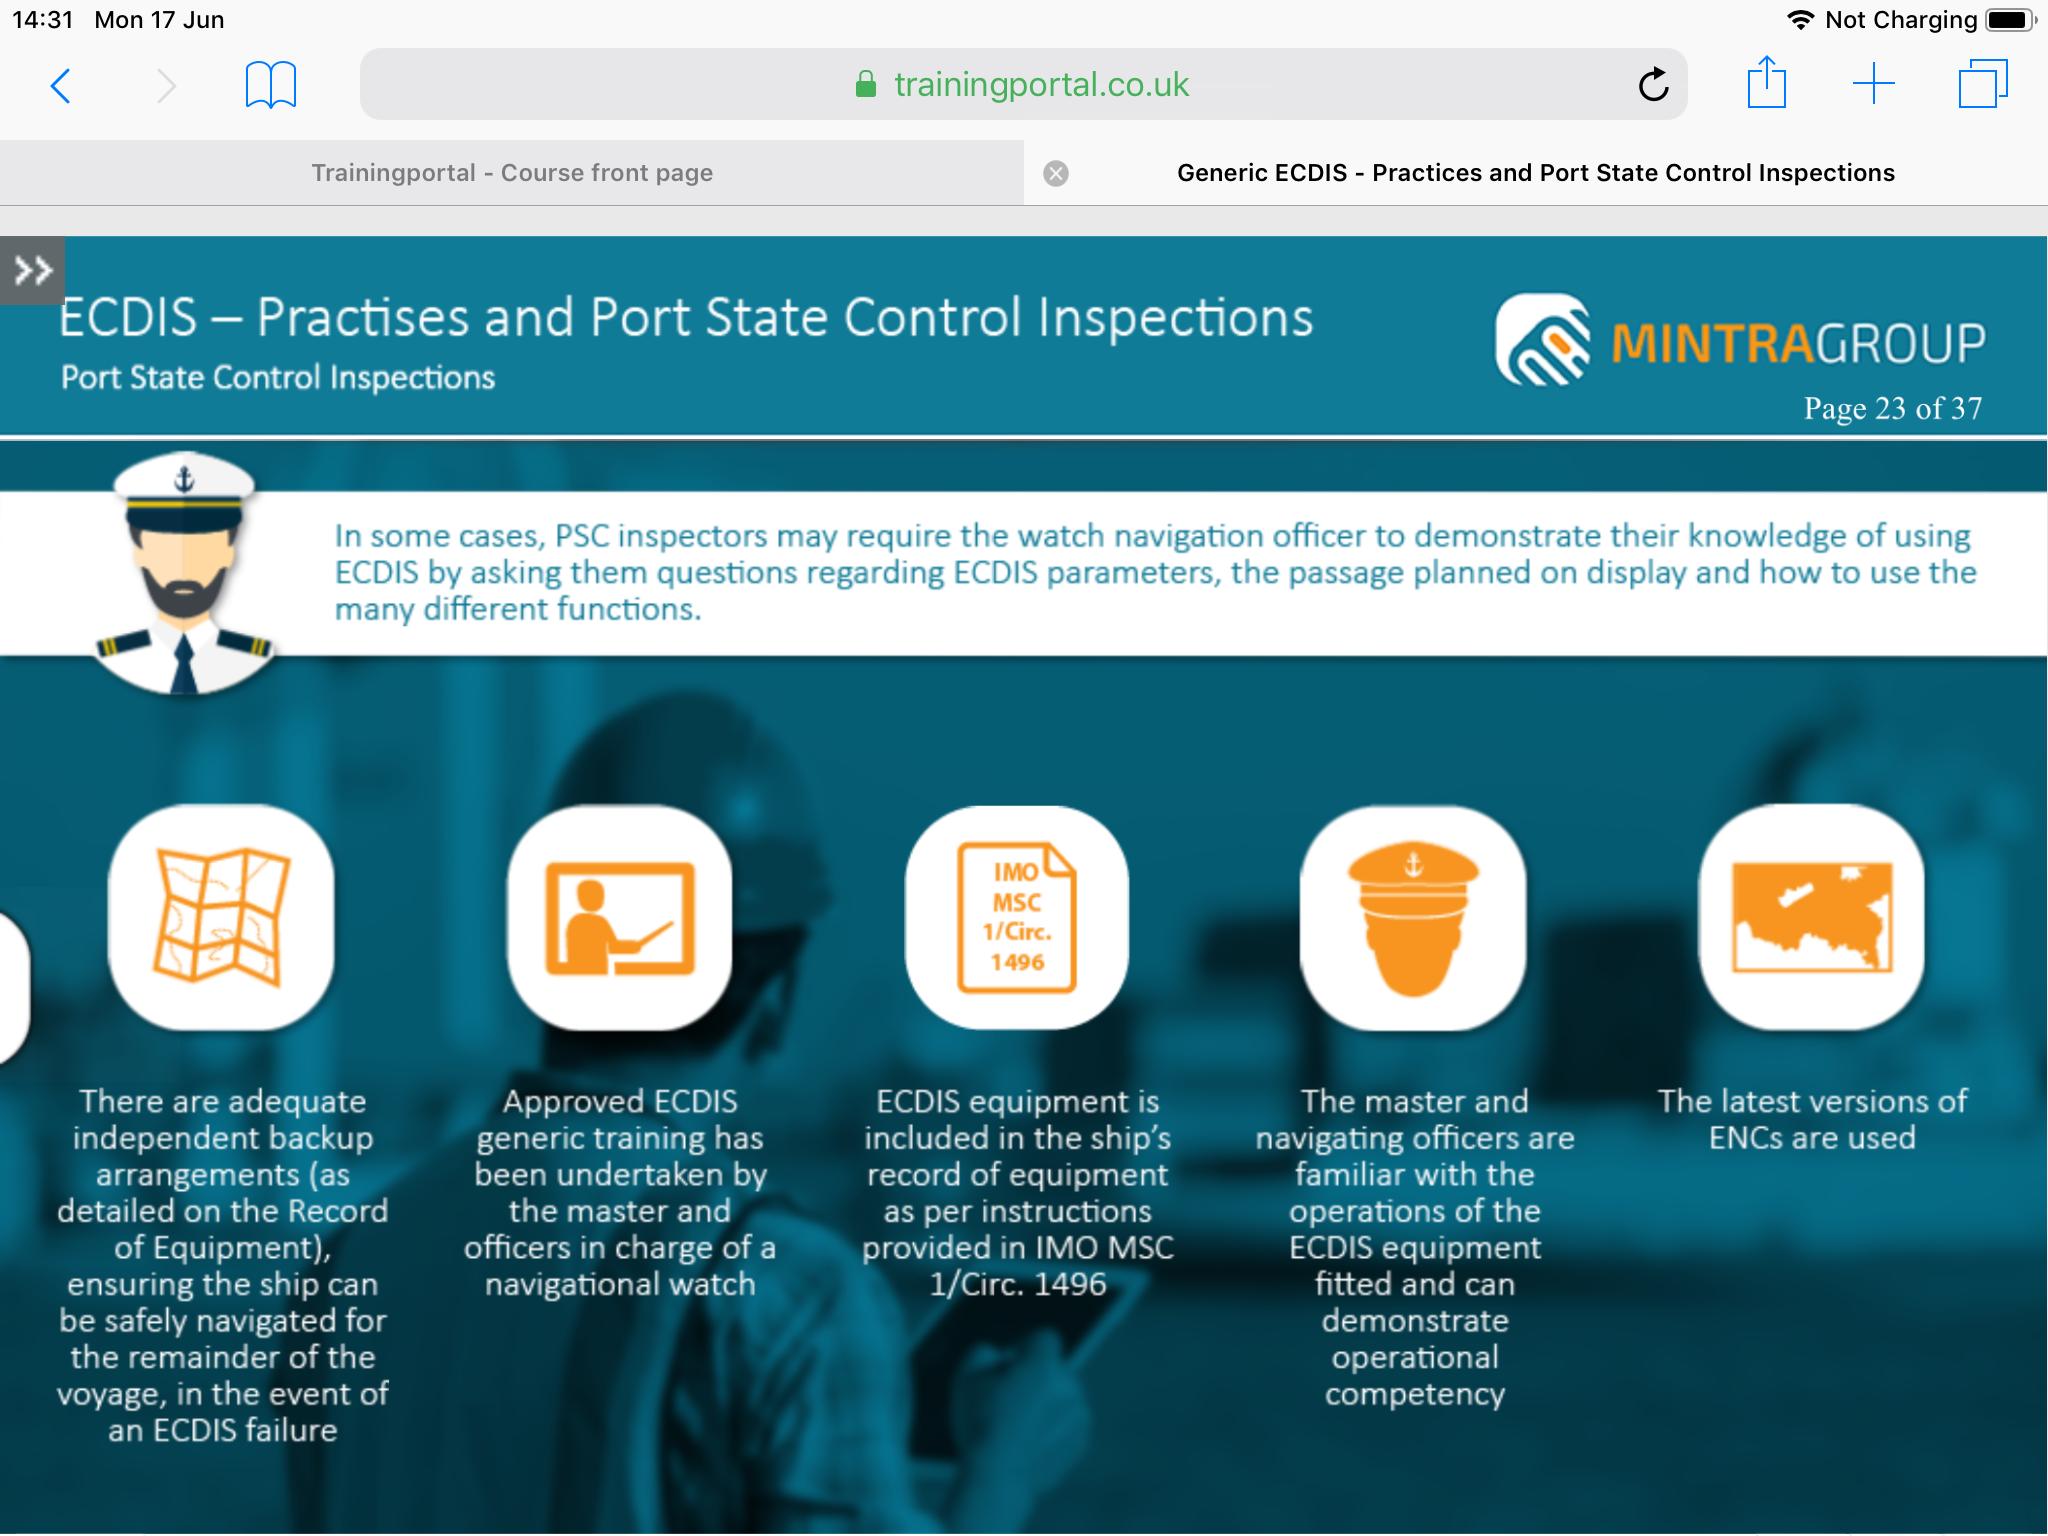 ECDIS – Practices and Port State Control Inspections Training